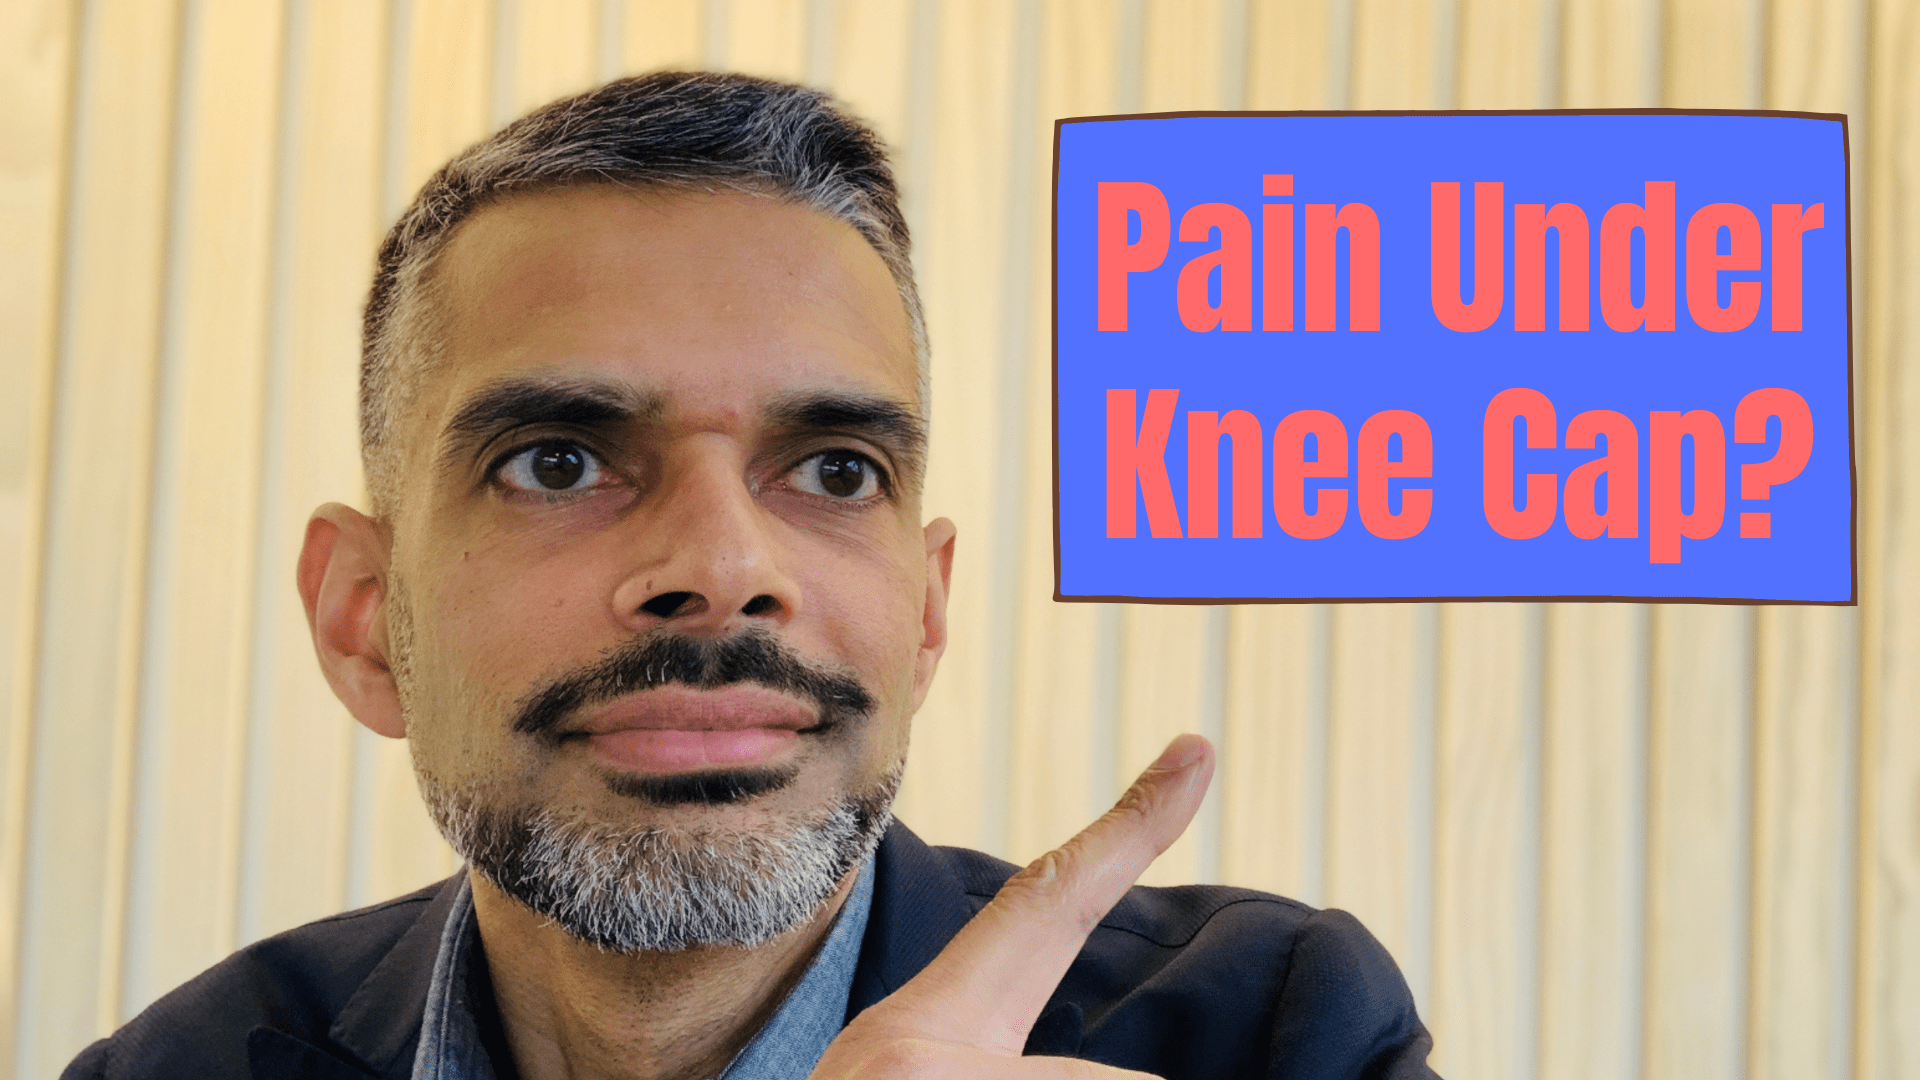 Why Do I Have Pain Under My Knee Cap?